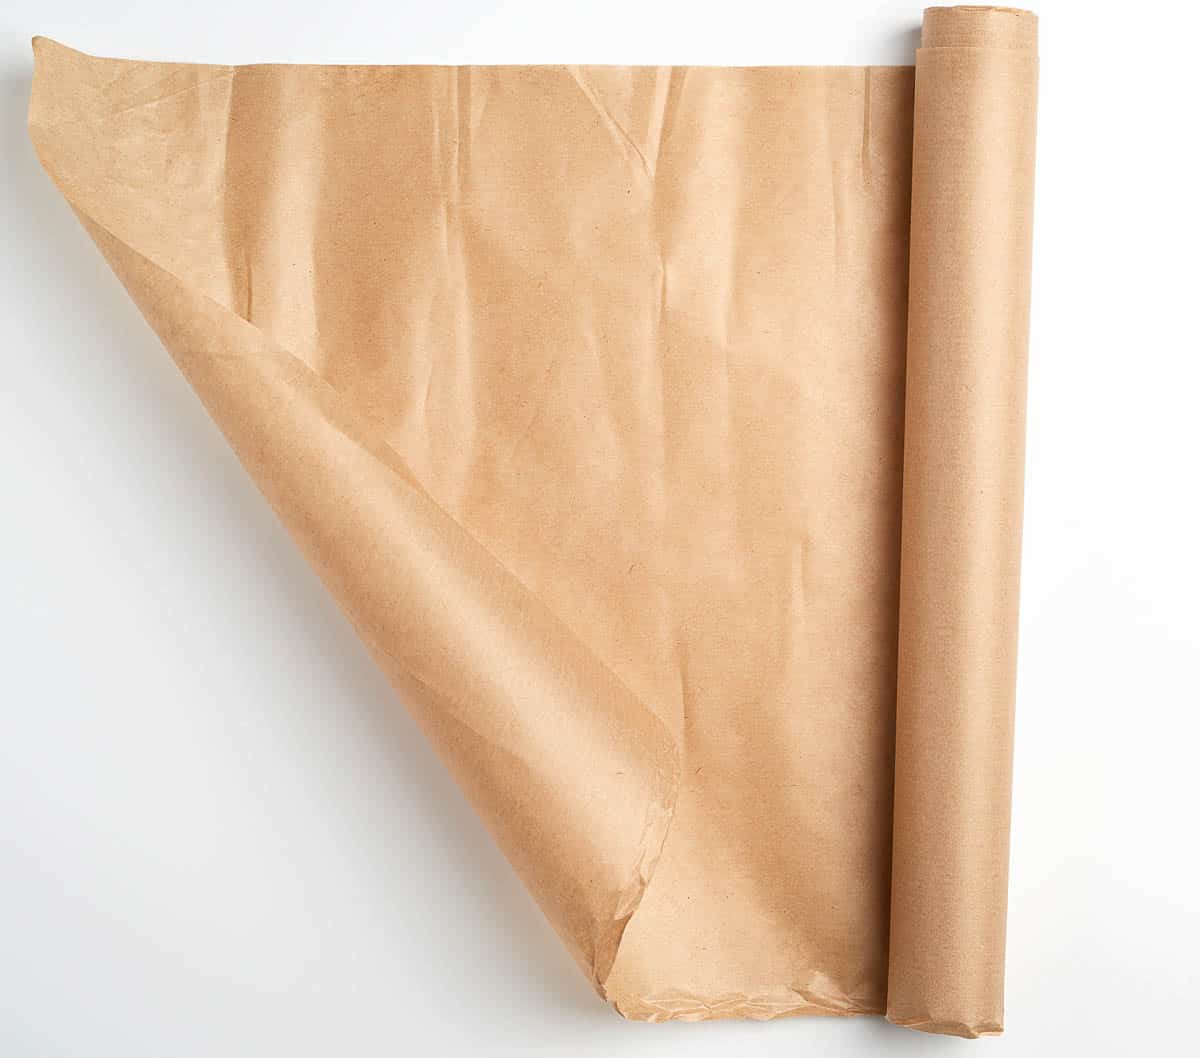 untwisted bundle of brown parchment baking paper.